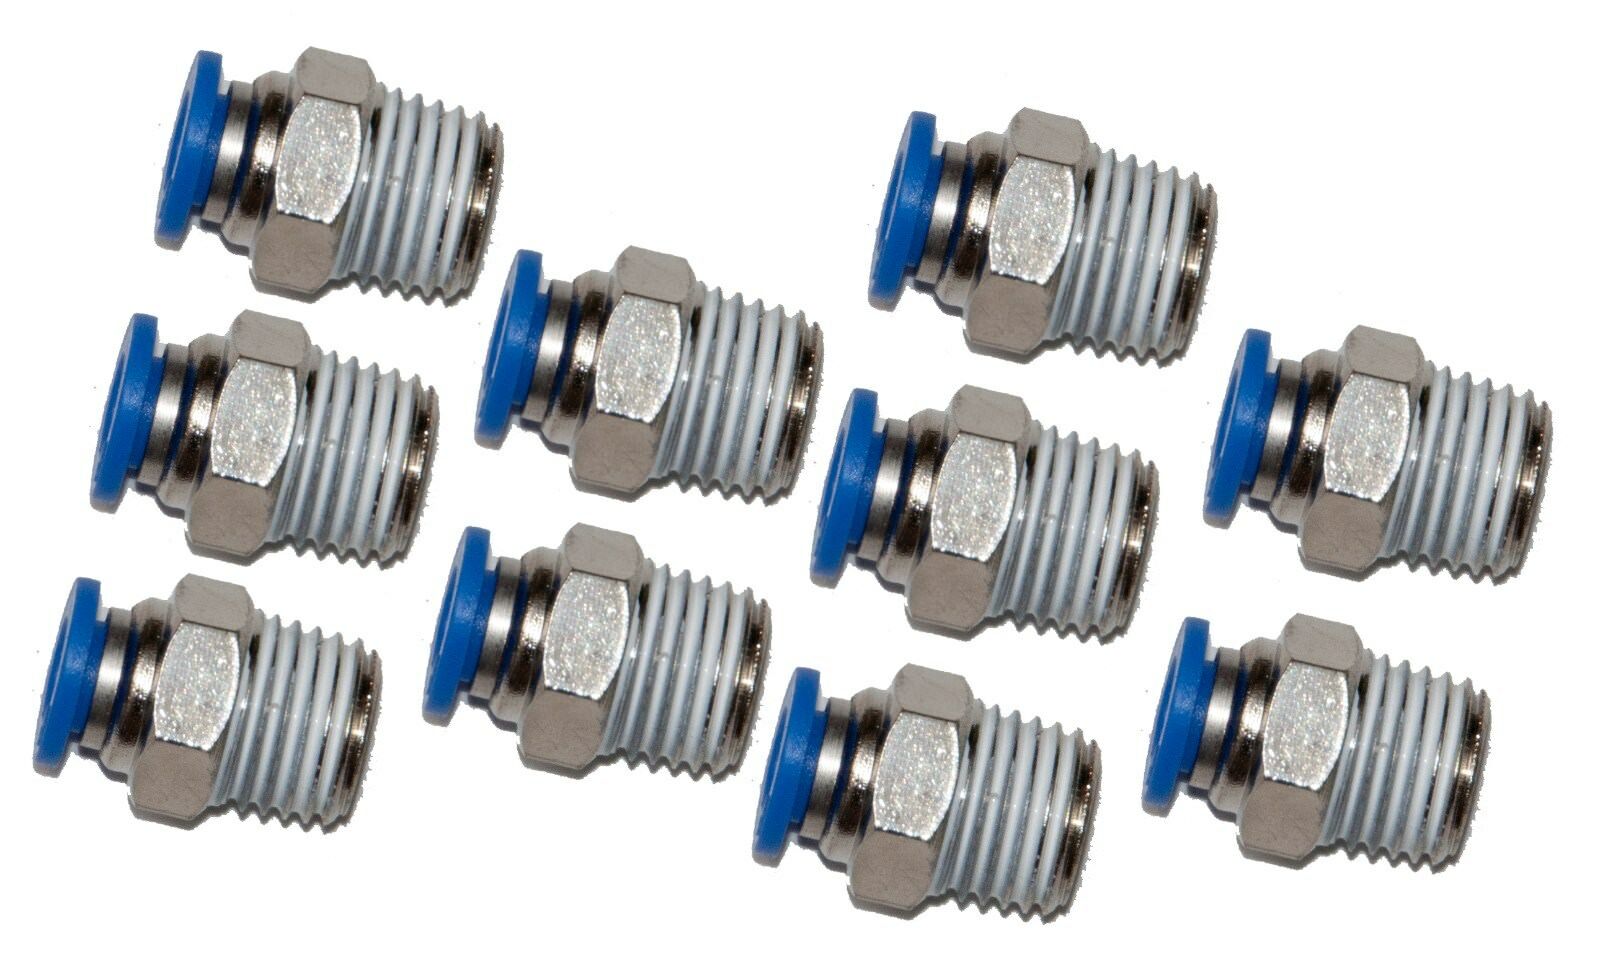 10 Pieces Pneumatic 1/4" Tube X 1/4" Npt Male Connector Push To Connect Fitting